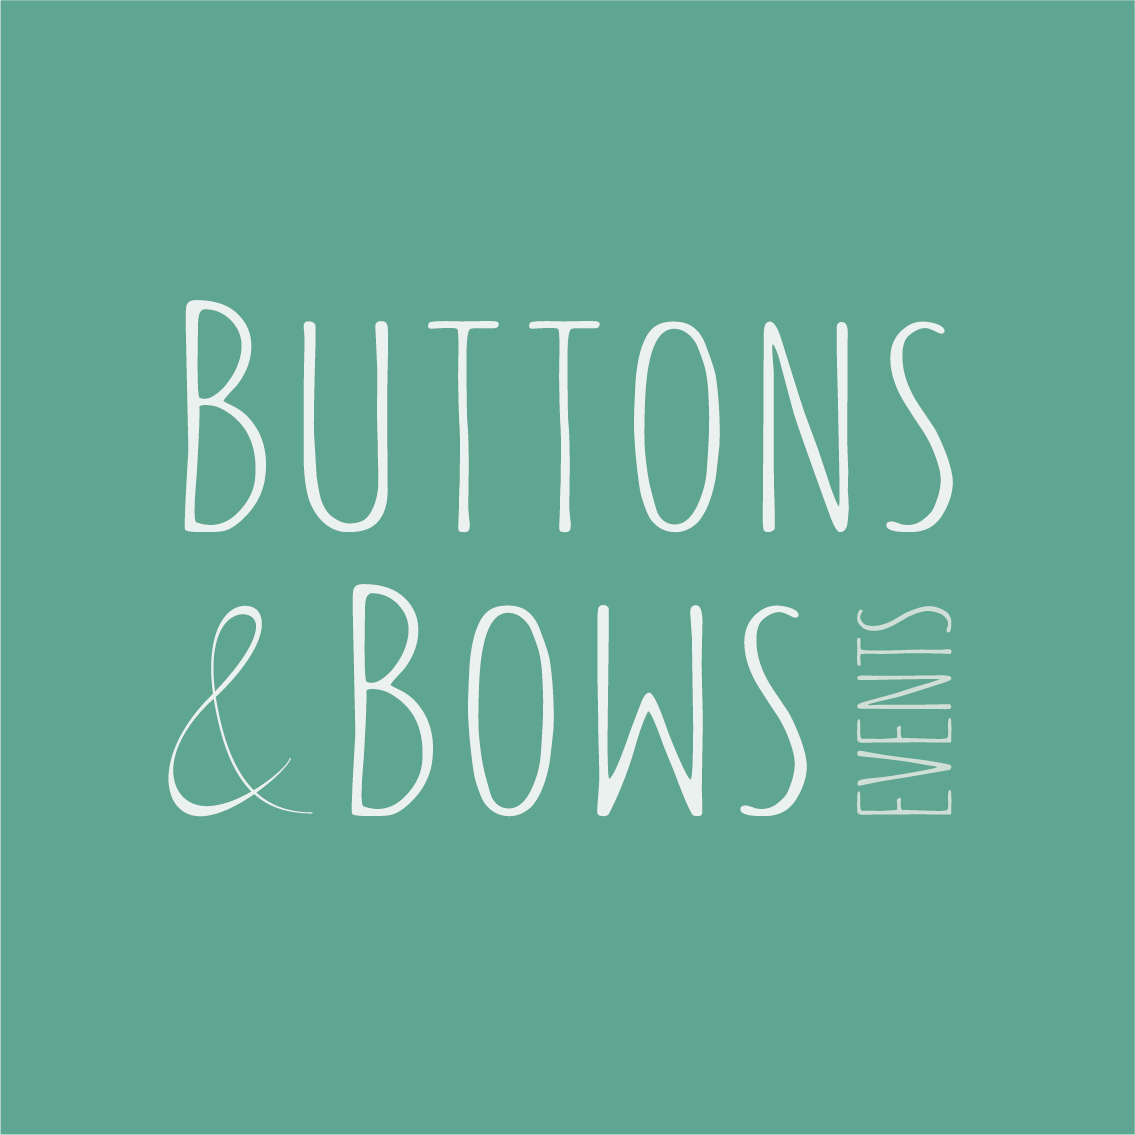 Buttons & Bows Events Logo